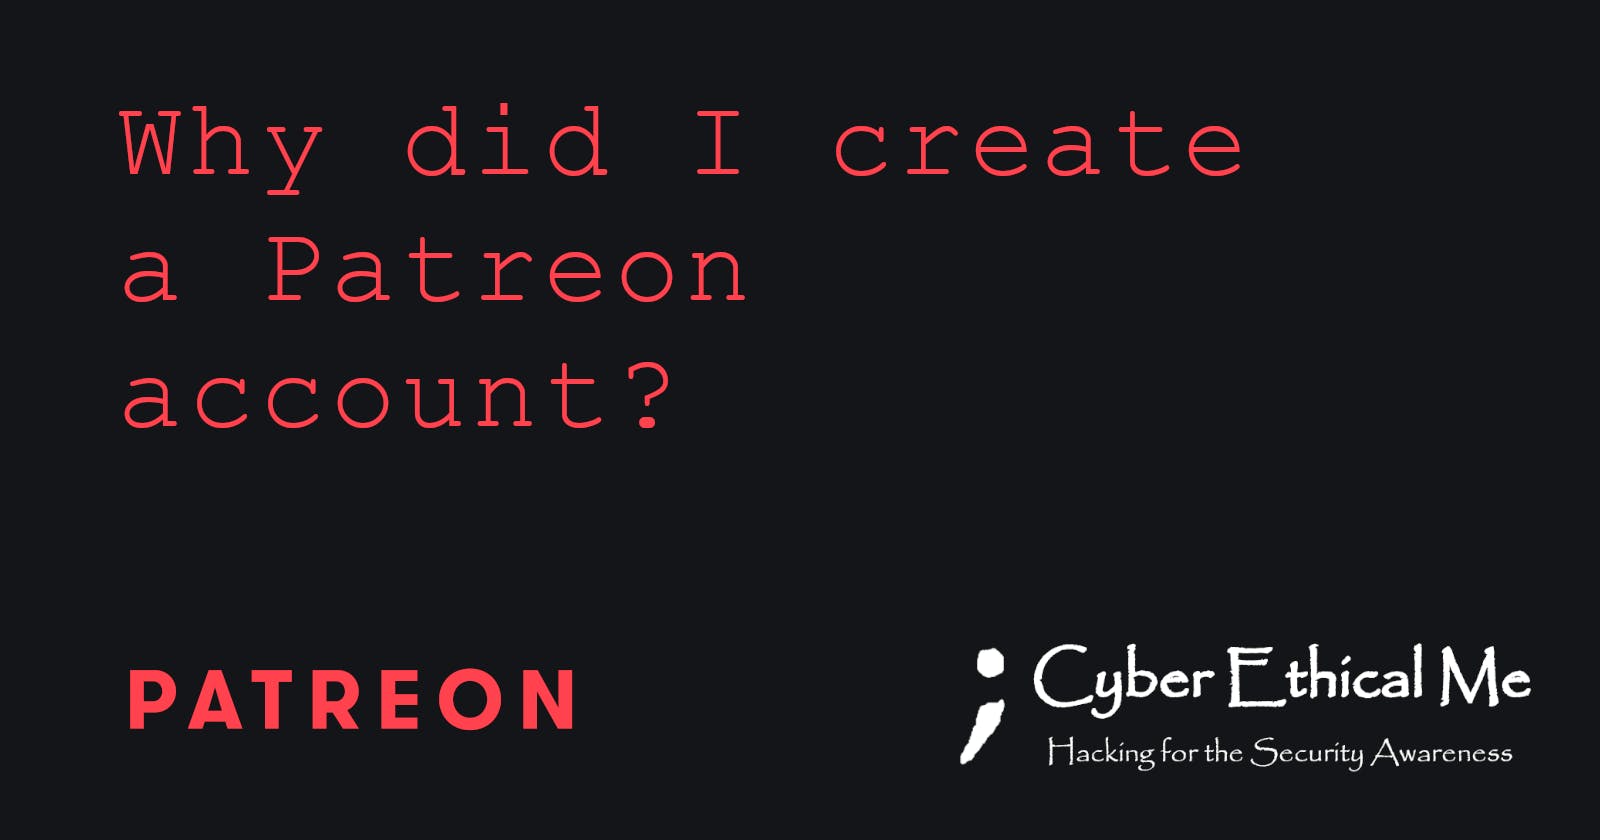 Why did I create a Patreon account?